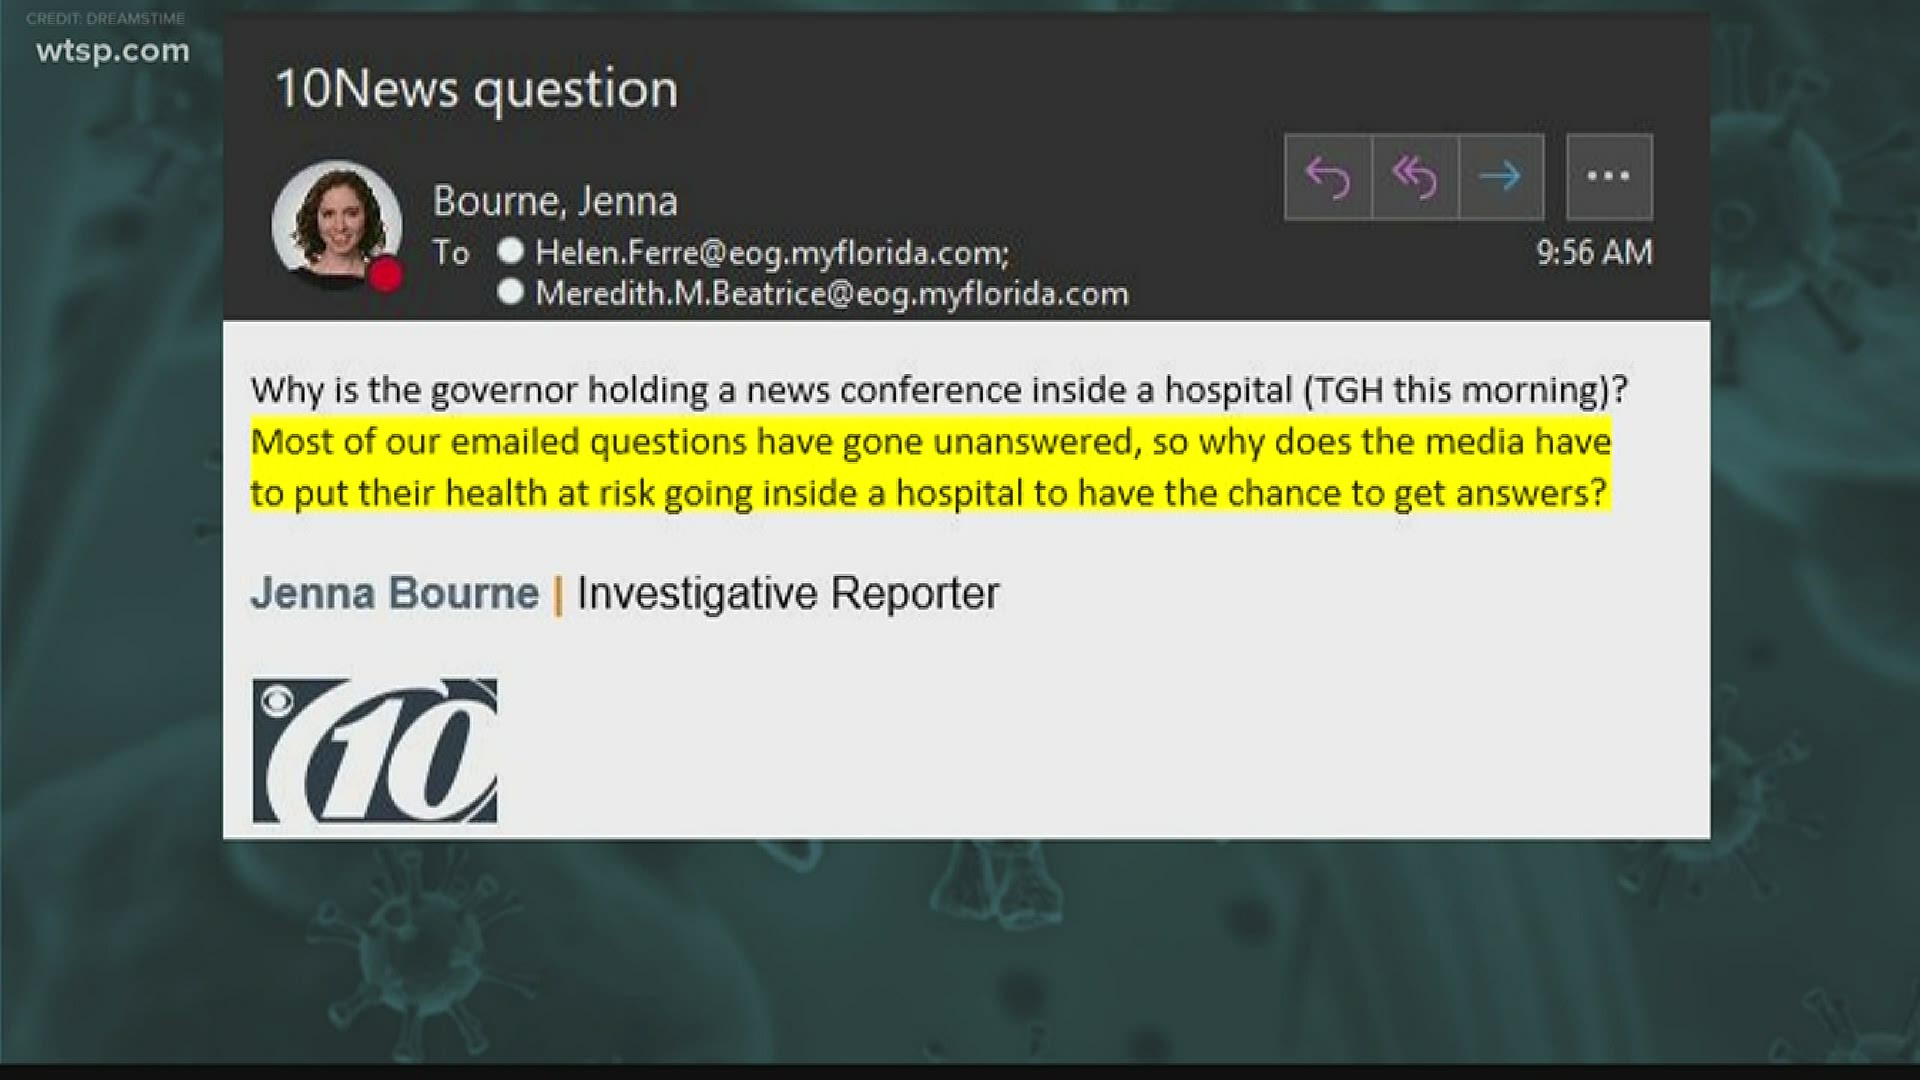 10 Tampa Bay reporter Jenna Bourne wanted to find out why the news conference was held in a place that could put people at risk.